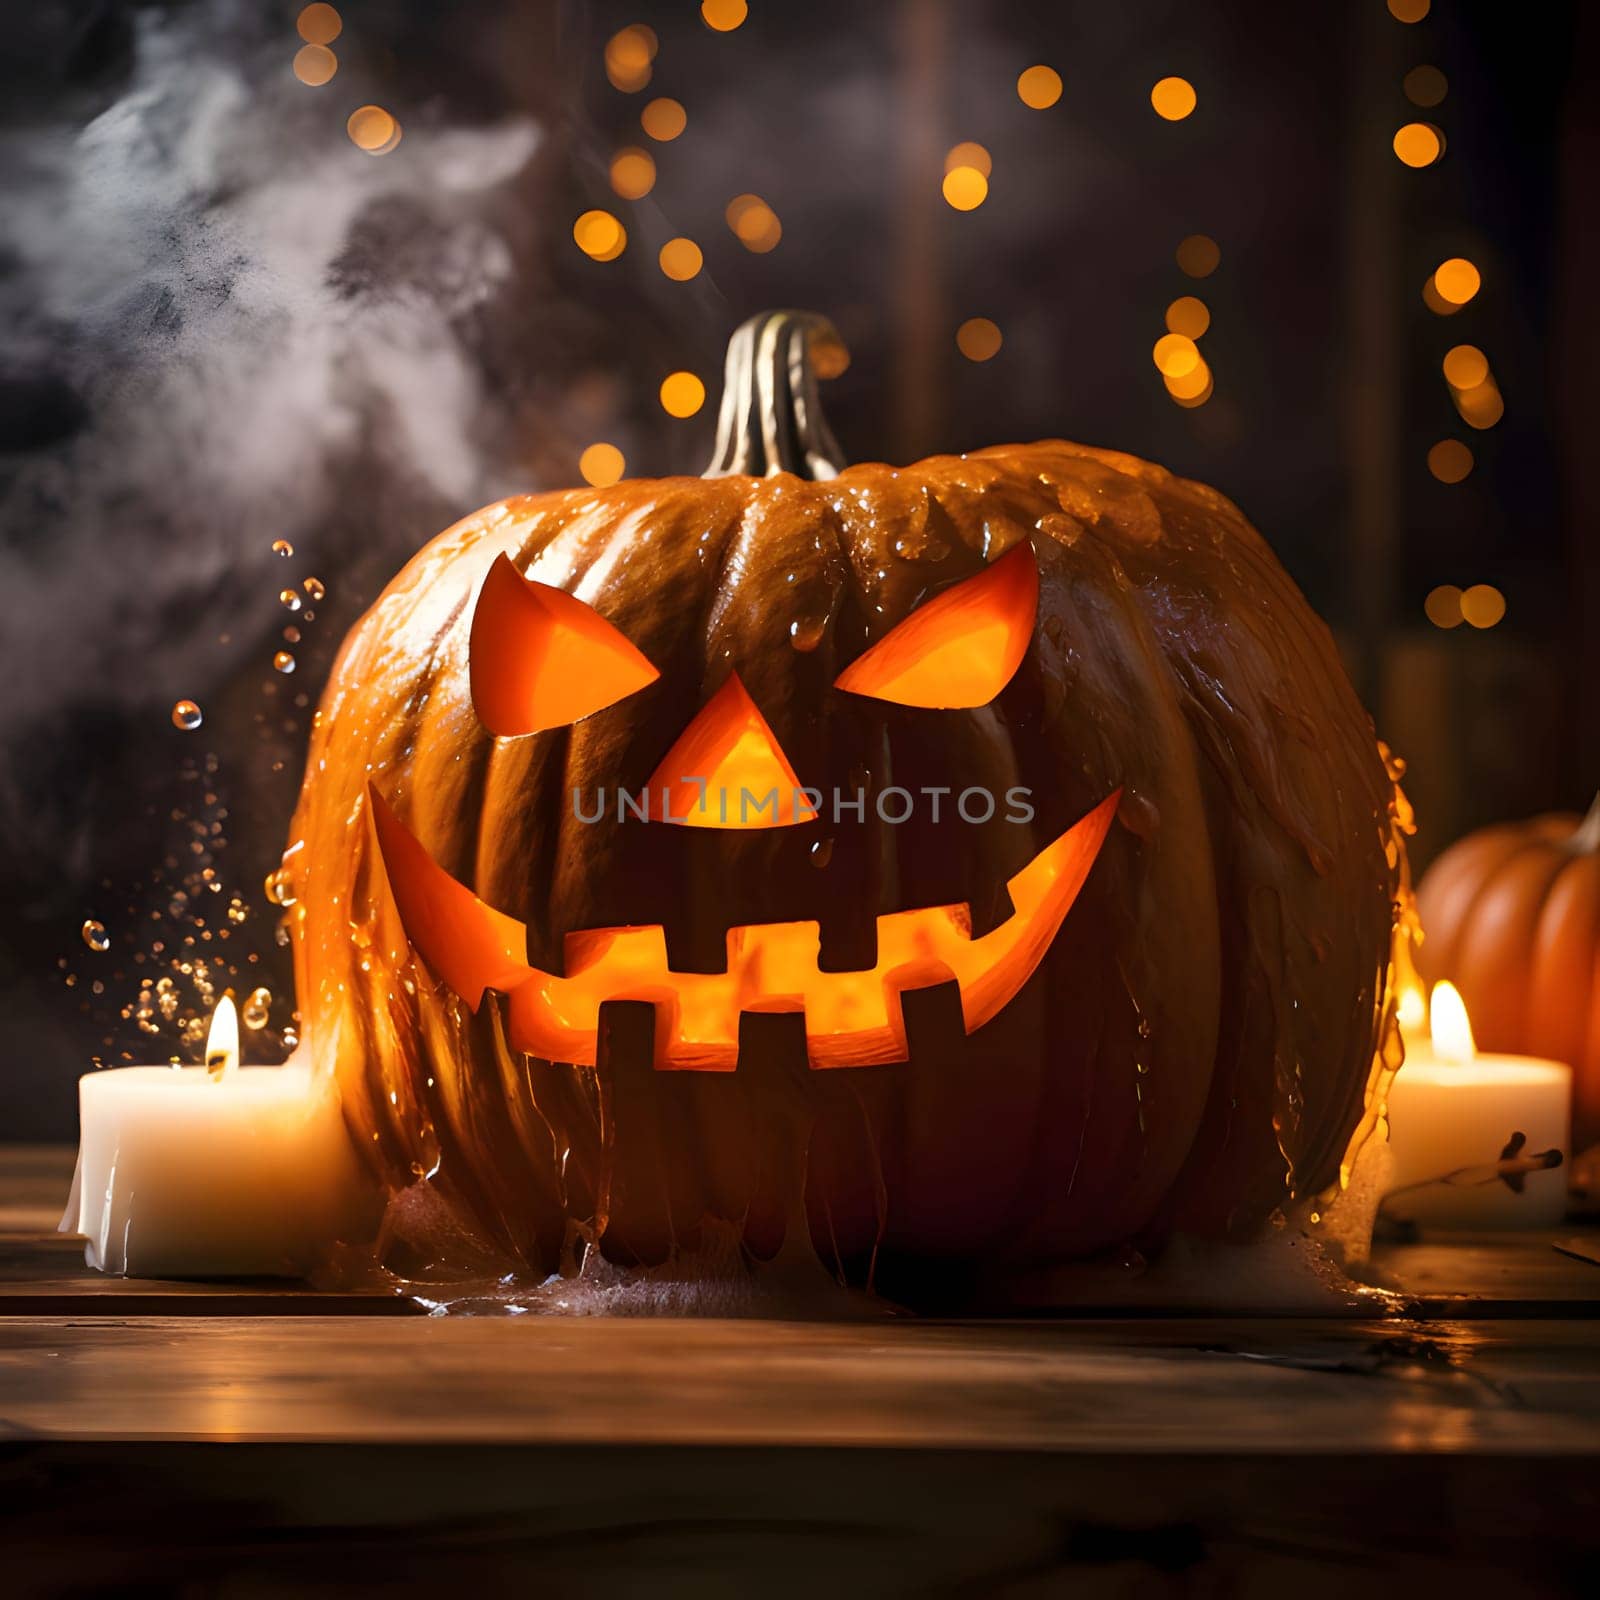 Big glowing jack-o-lantern pumpkin around candles in the background bokeh effect and smoke, a Halloween image. Atmosphere of darkness and fear.